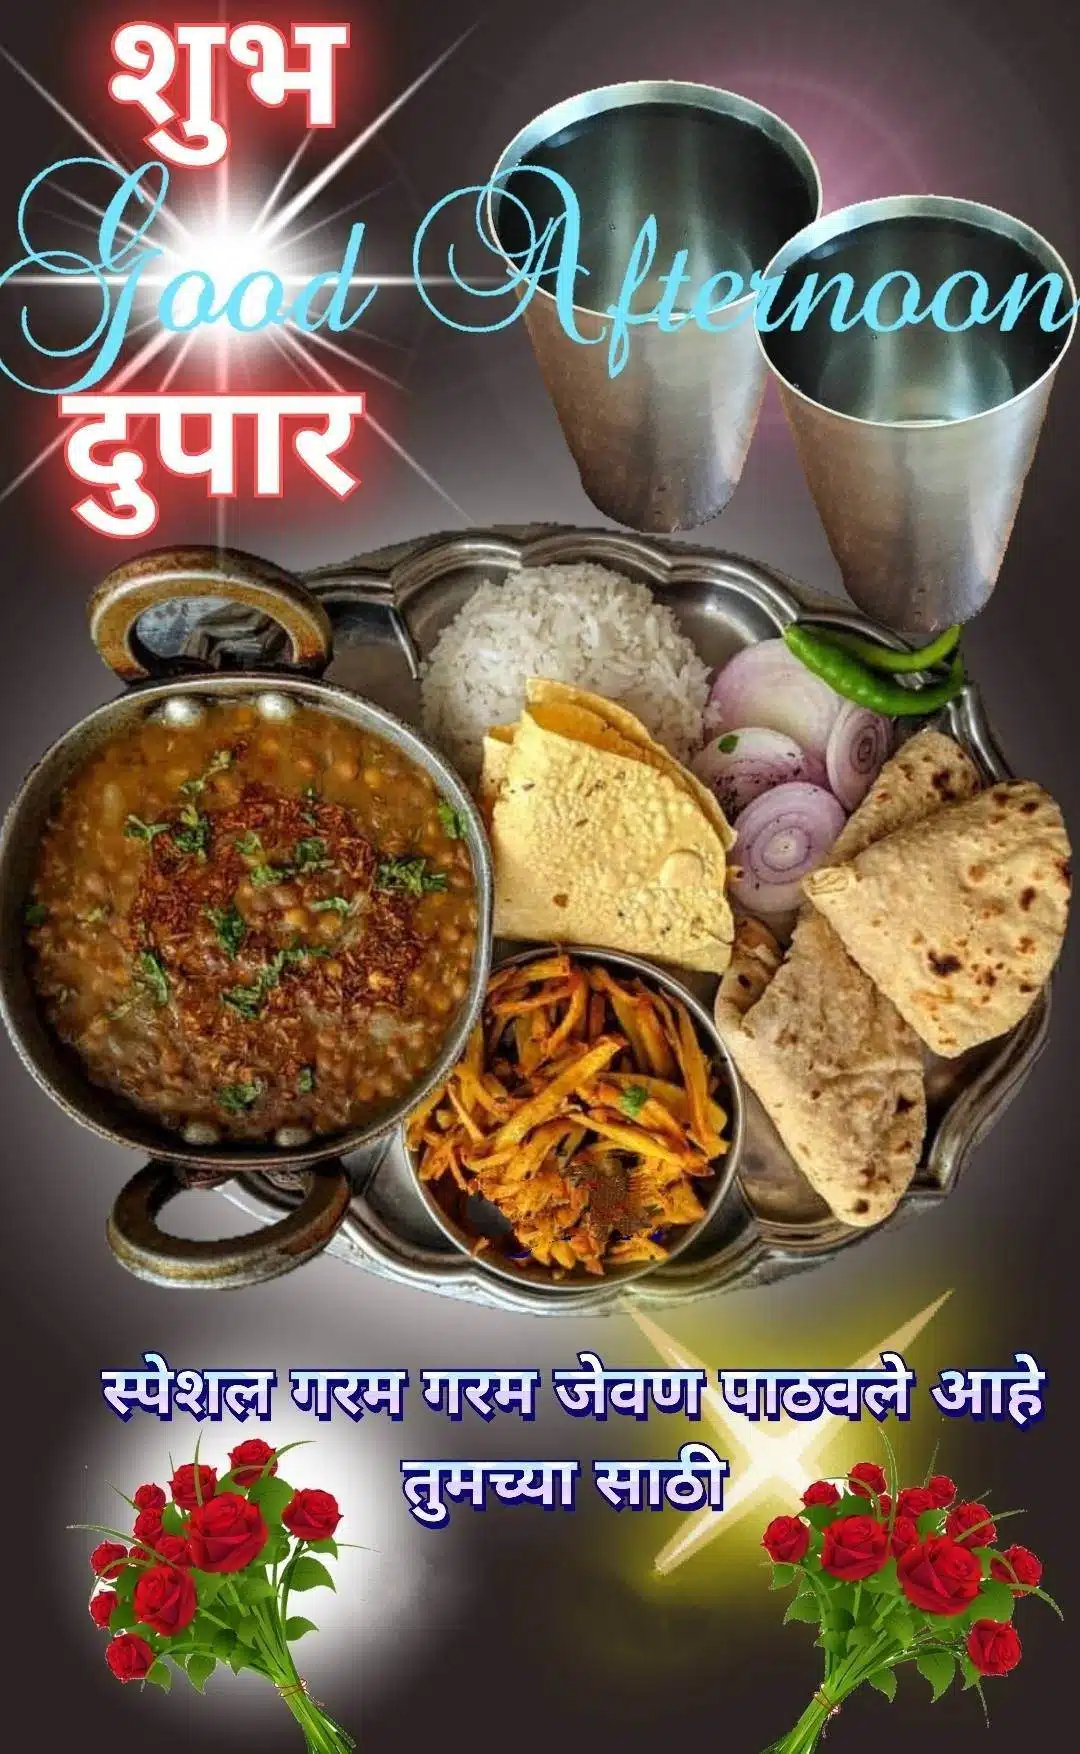 Lunch Good Afternoon In Marathi (24)